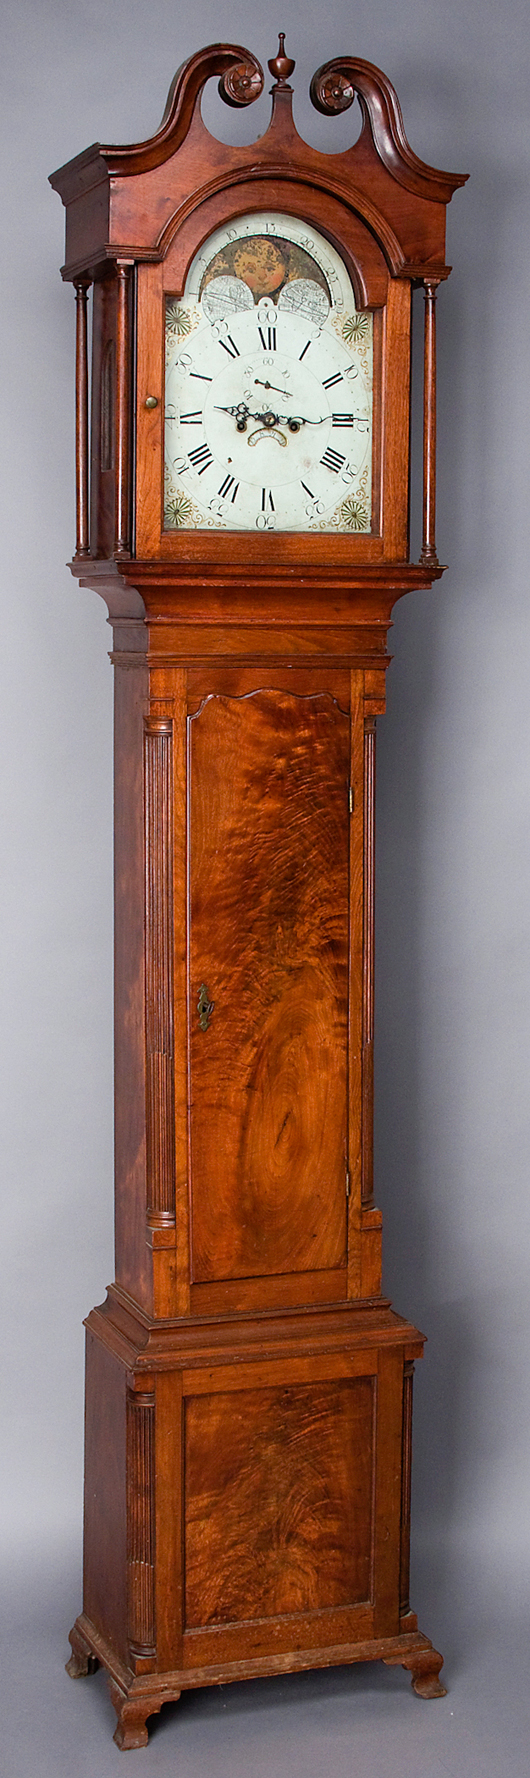 Fine Winchester, VA walnut tall case clock, c. 1795, the case attributed to the Frye-Martin shops